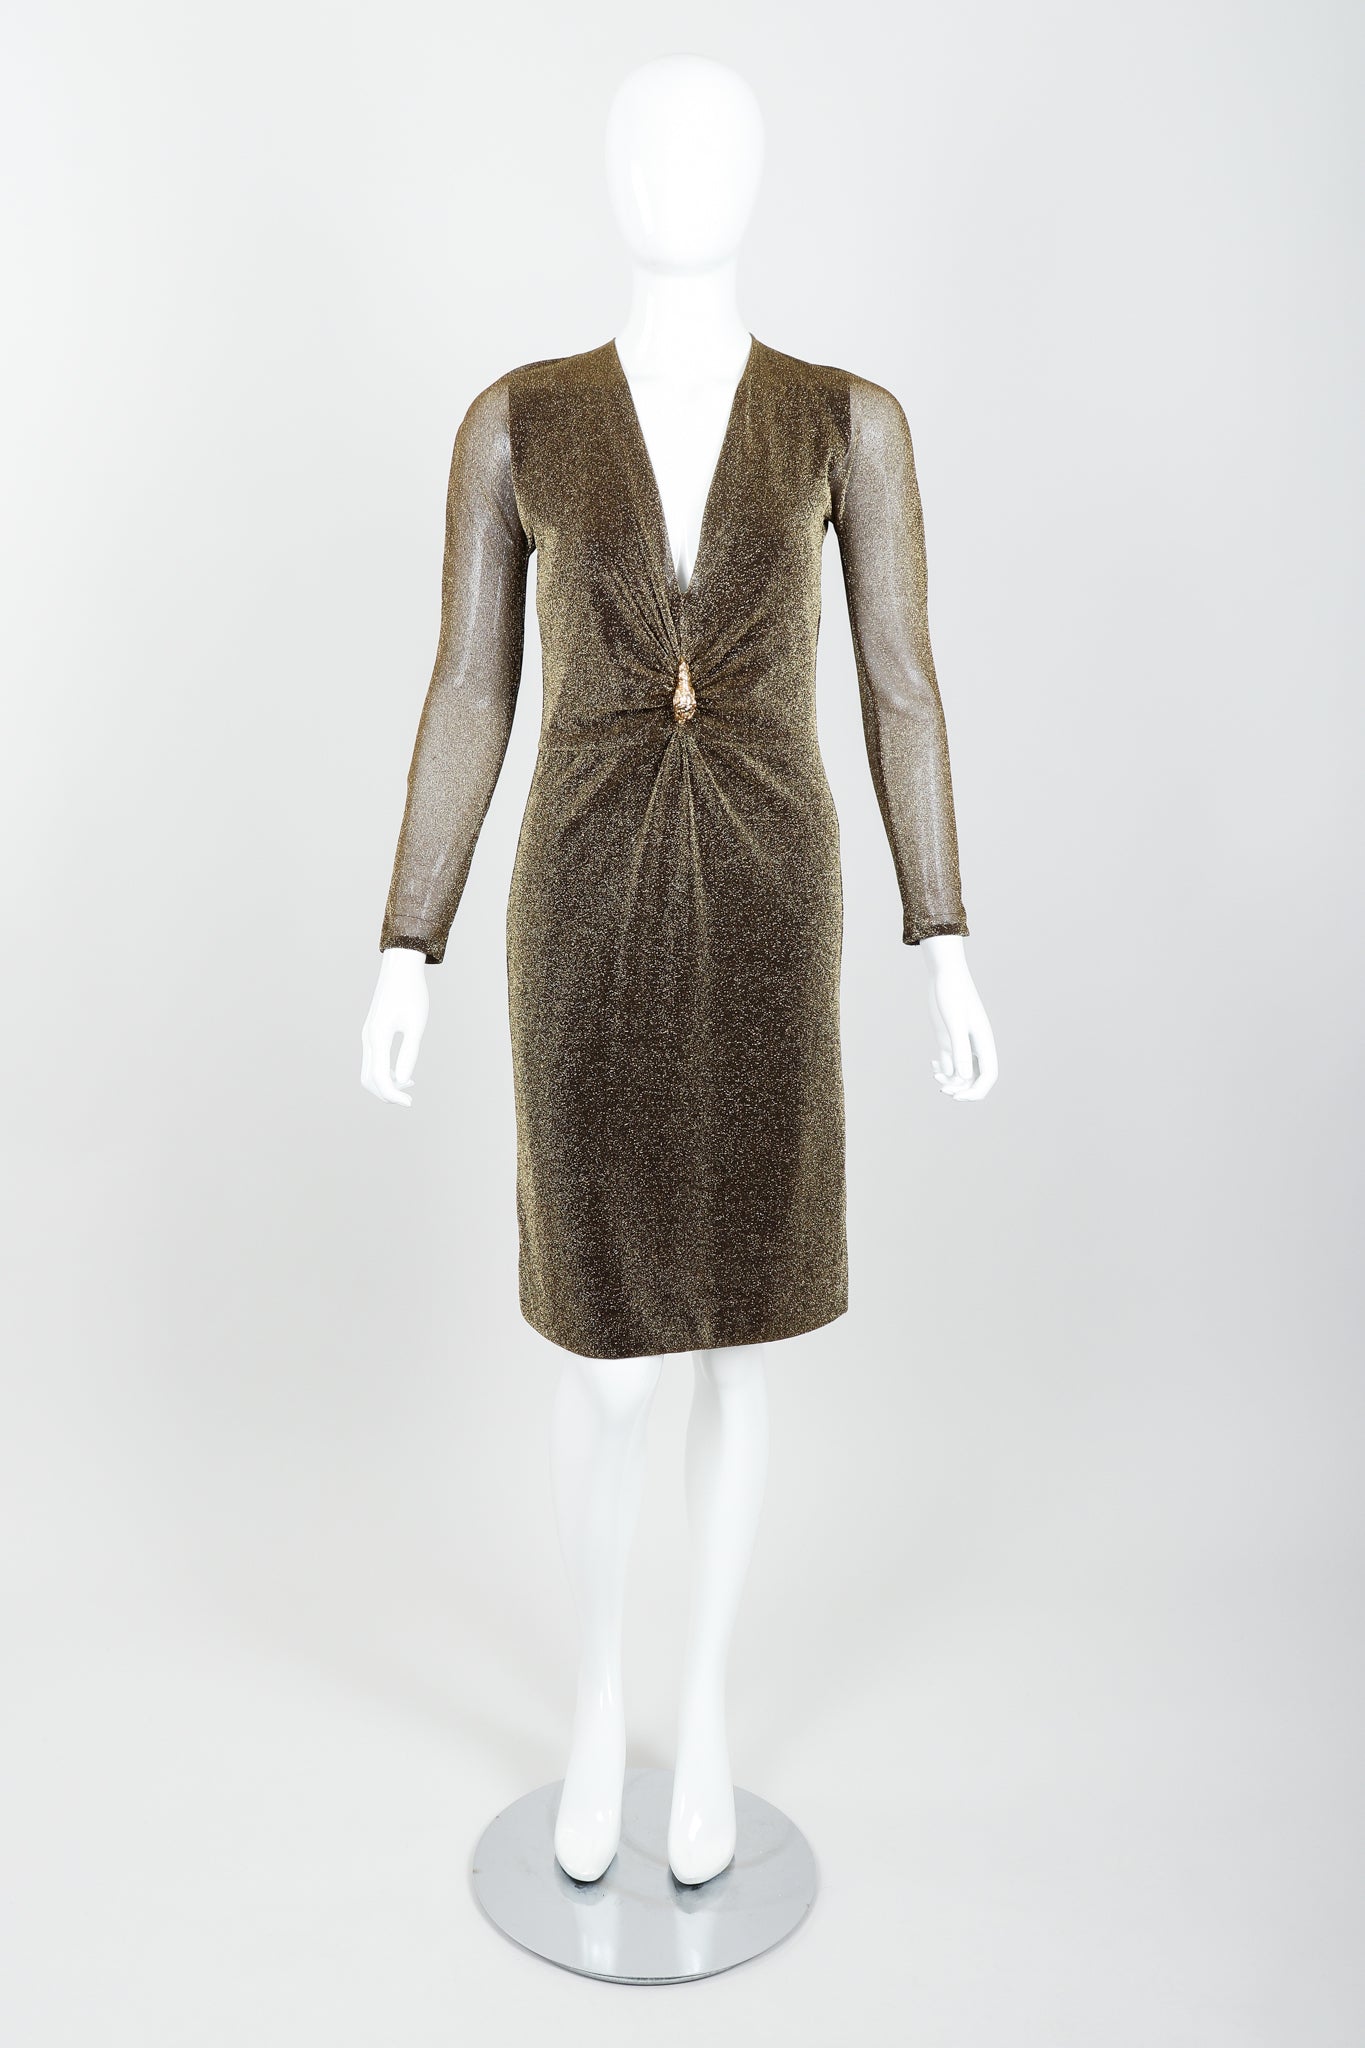 Vintage Gucci Tom Ford A/W 2000 Gold Lamé Dionysus Dress on Mannequin front at Recess LA